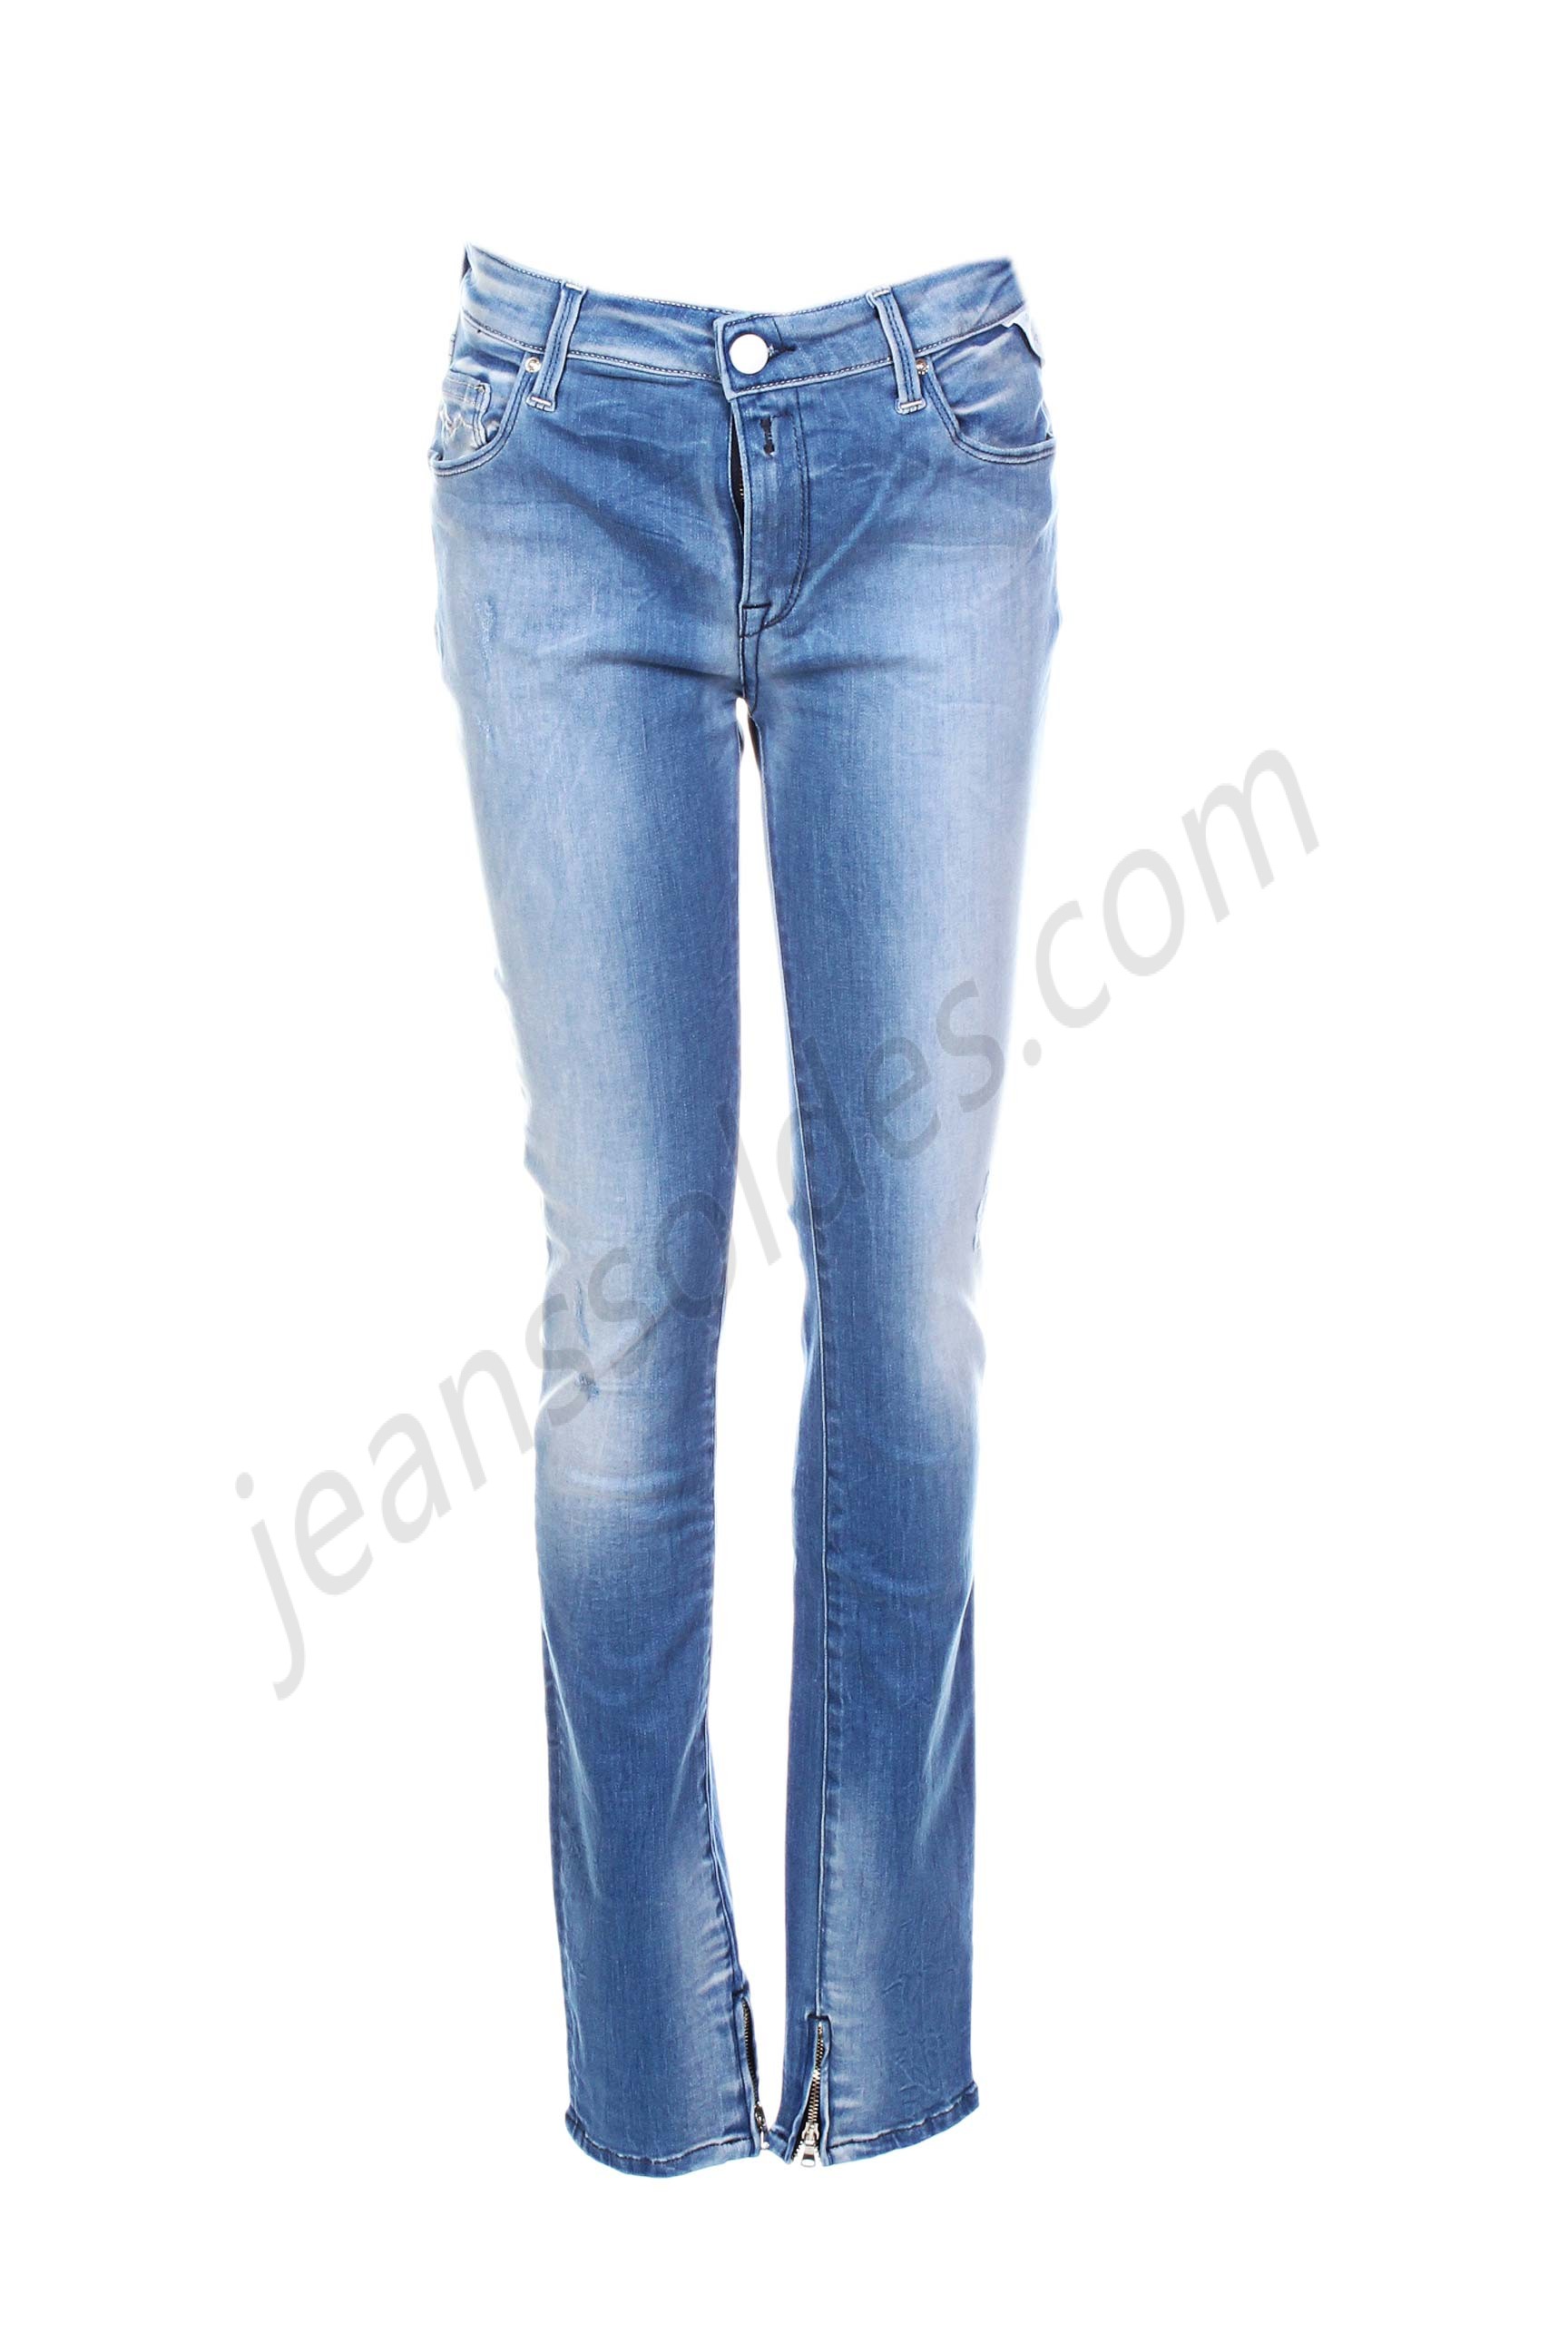 replay-Jeans coupe slim prix d’amis - replay-Jeans coupe slim prix d’amis